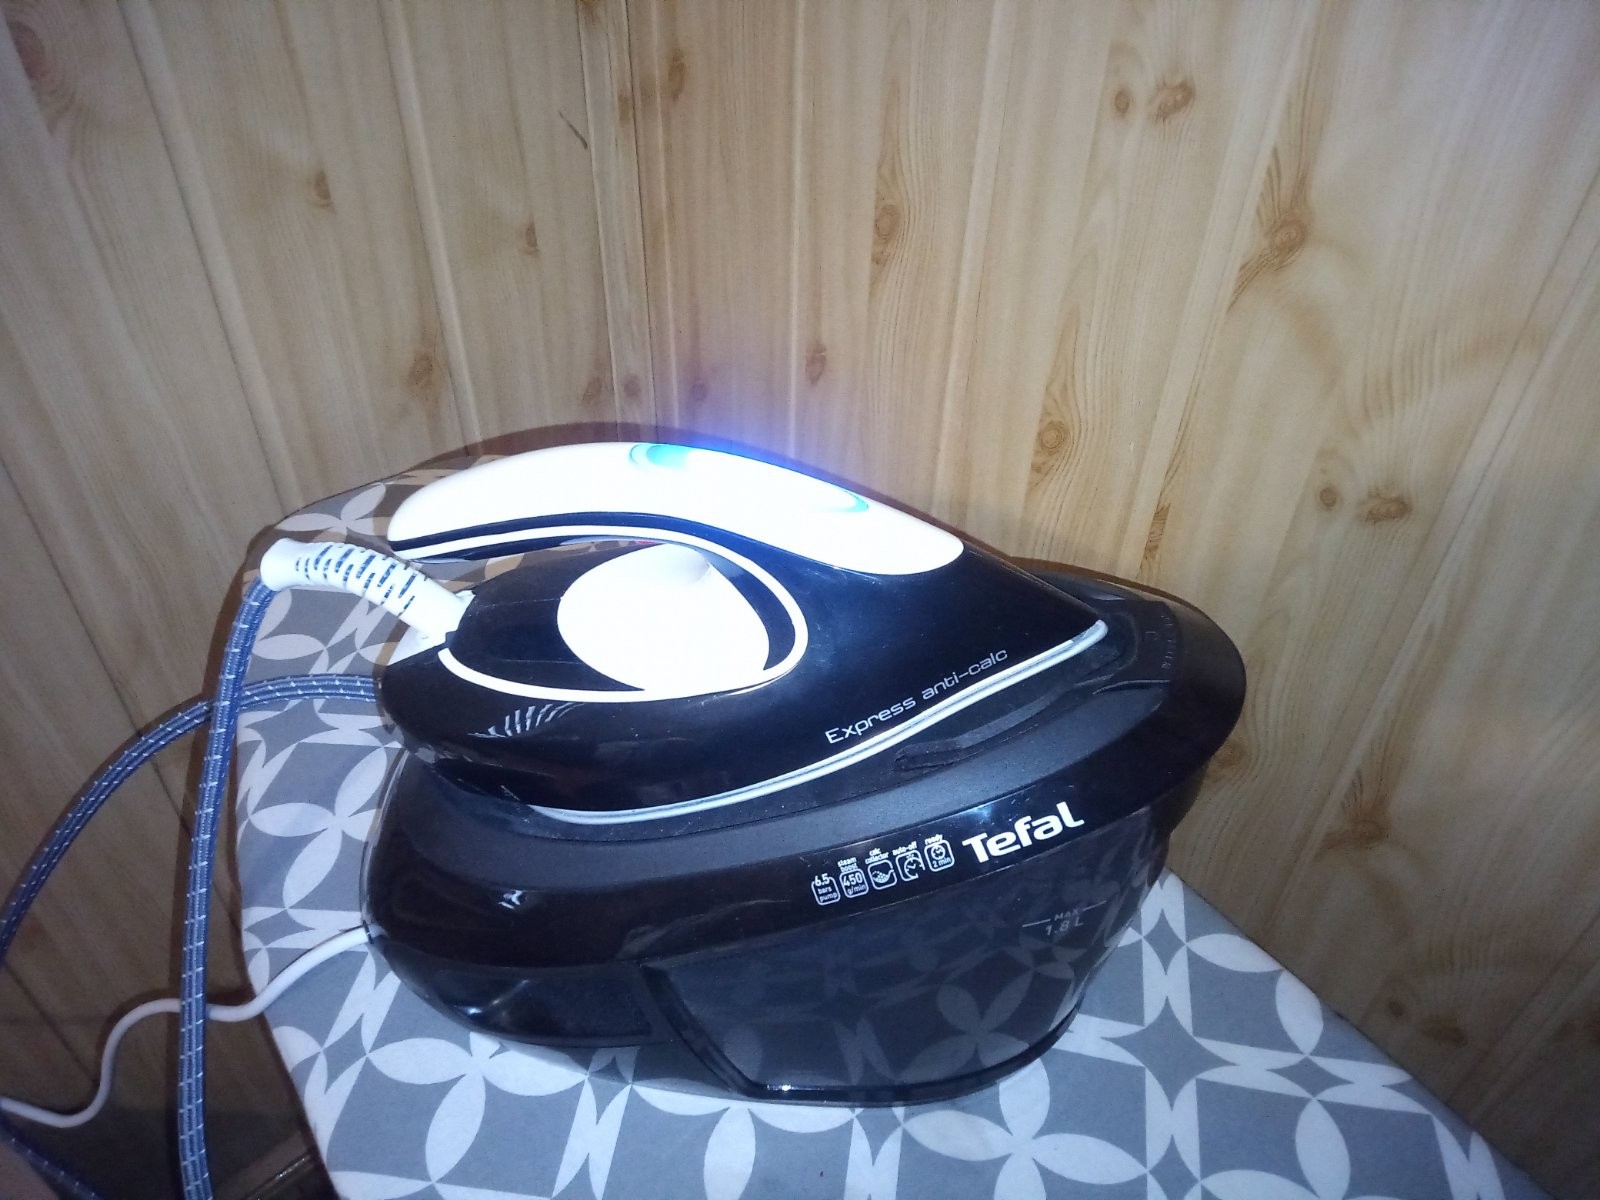 Tefal - Kyiv, reviews, price iron SV prices, specifications in steam Odessa generator: Dnepropetrovsk, Lviv, Express 8055 (SV8055E0) Ukraine: with stores > buy